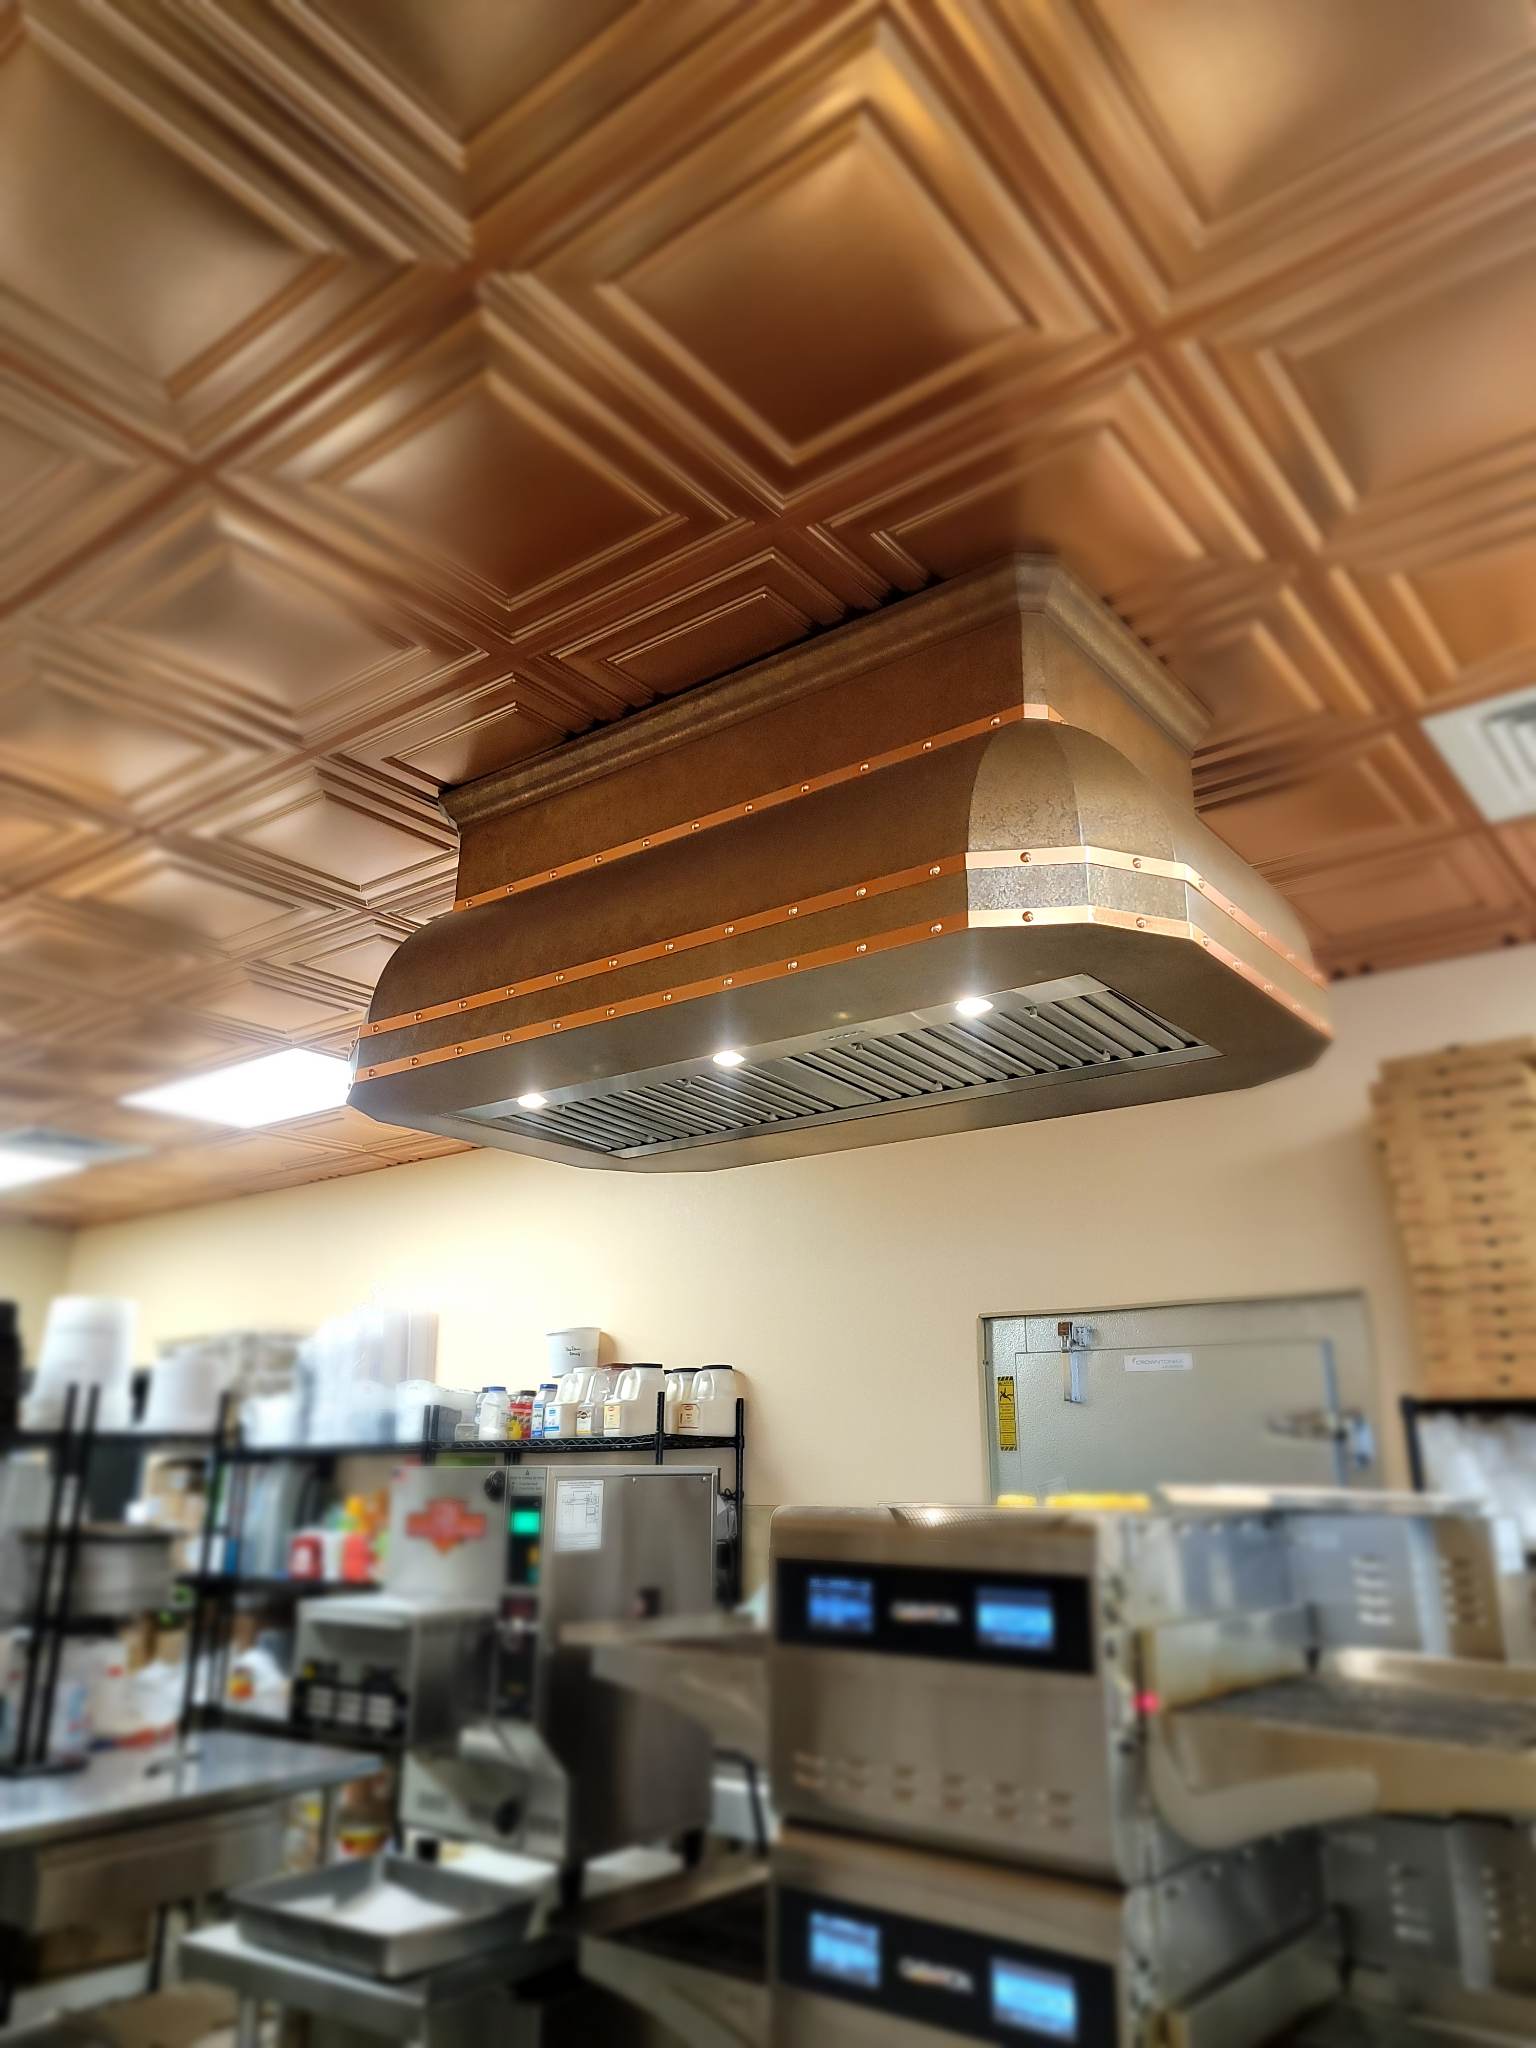 CopperSmith Euro ES9 Island Mount Weathered Copper Kitchen Range Hood with New Penny Copper Straps and Rivets industrial style in commercial food service